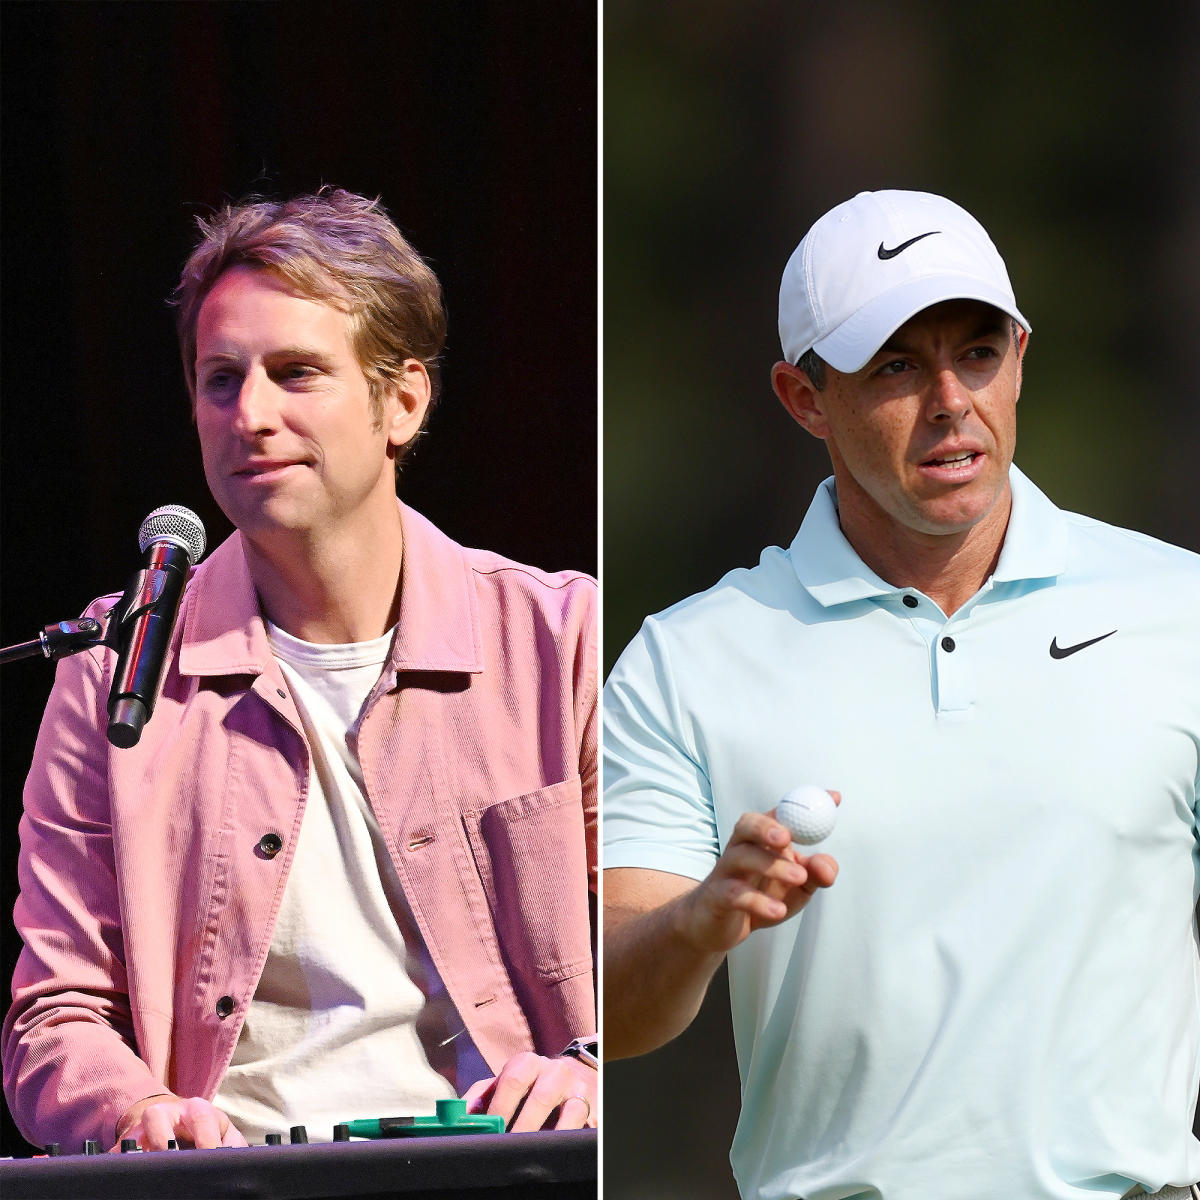 Singer-songwriter Ben Rector writes song for Rory McIlroy after US Open failure